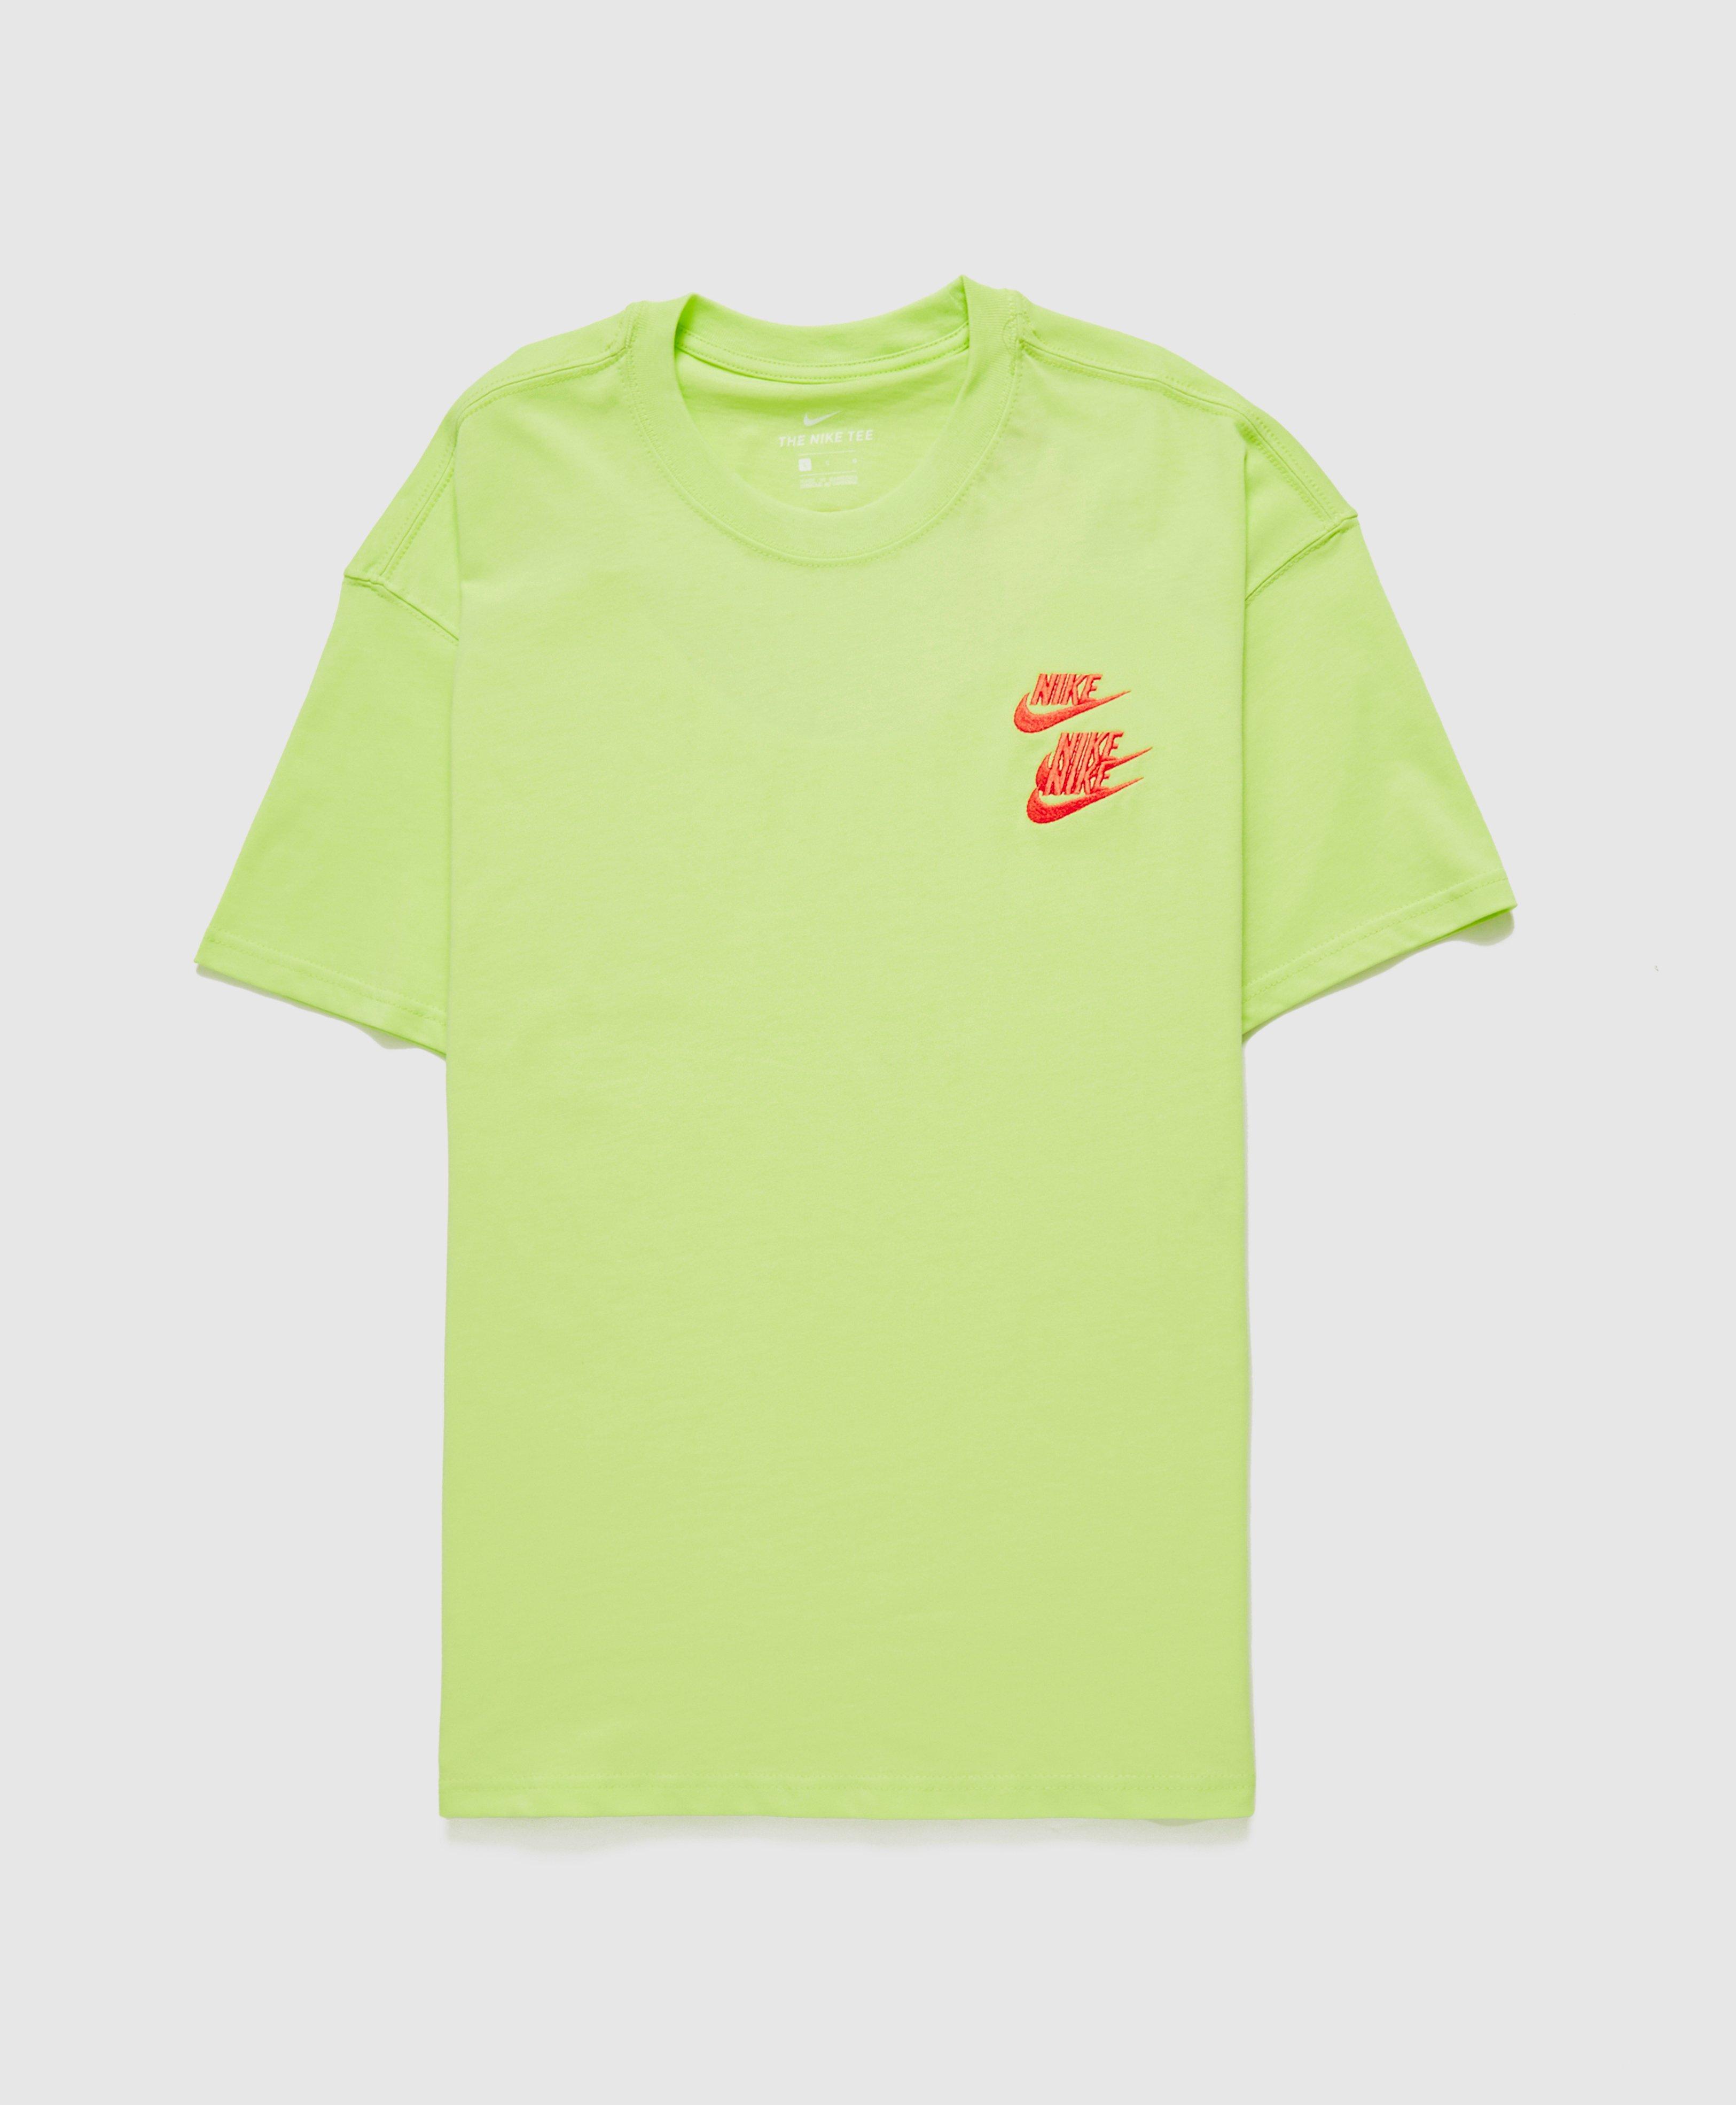 Nike Cotton World Tour T-shirt in Green for Men - Lyst